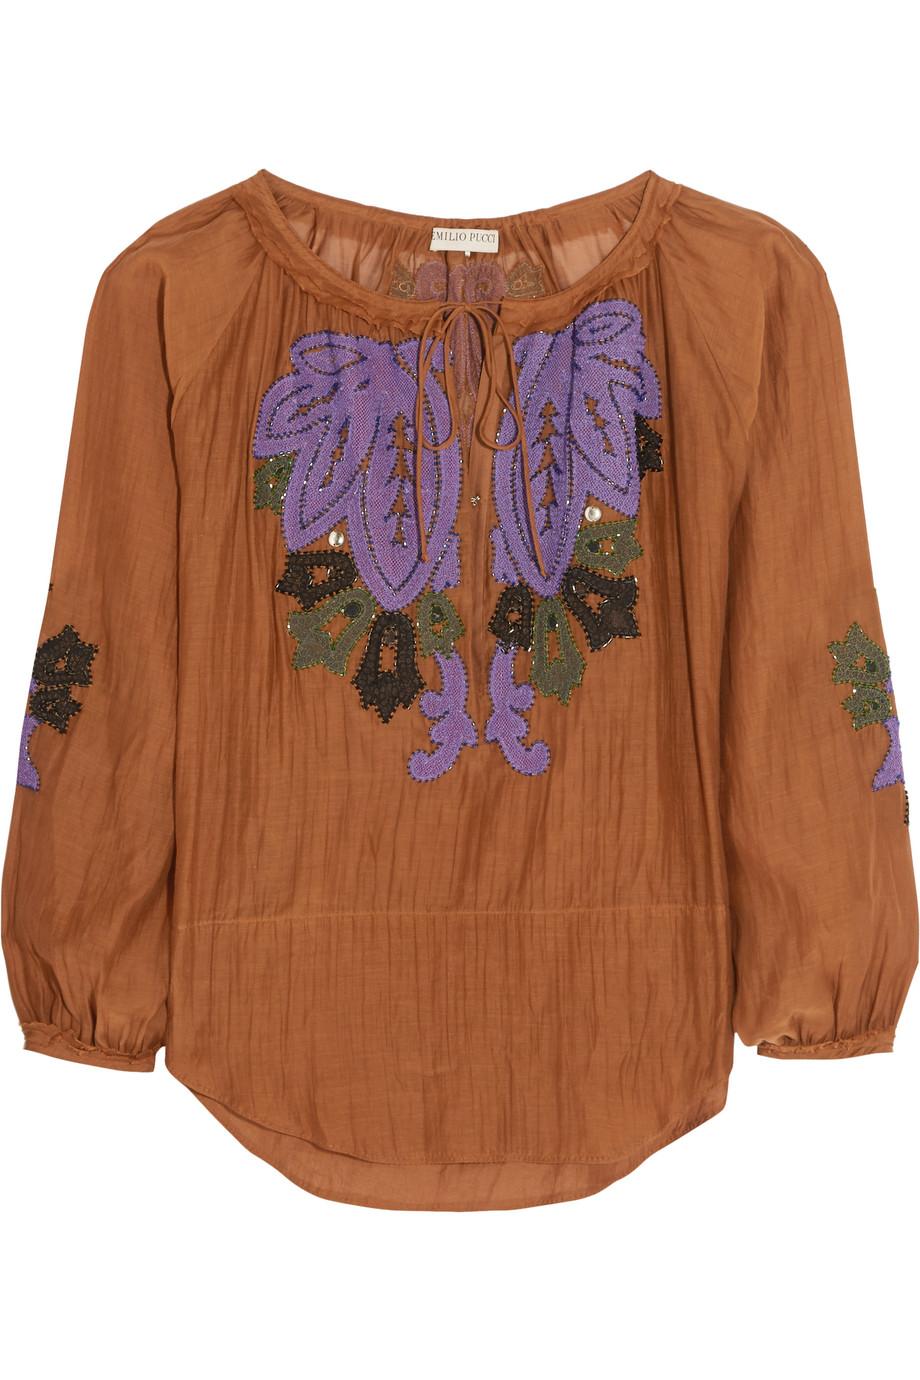 UNWORN Emilio Pucci by Peter Dundas Embroidered Kaftan Tunic Top Blouse 40 In Excellent Condition For Sale In Switzerland, CH